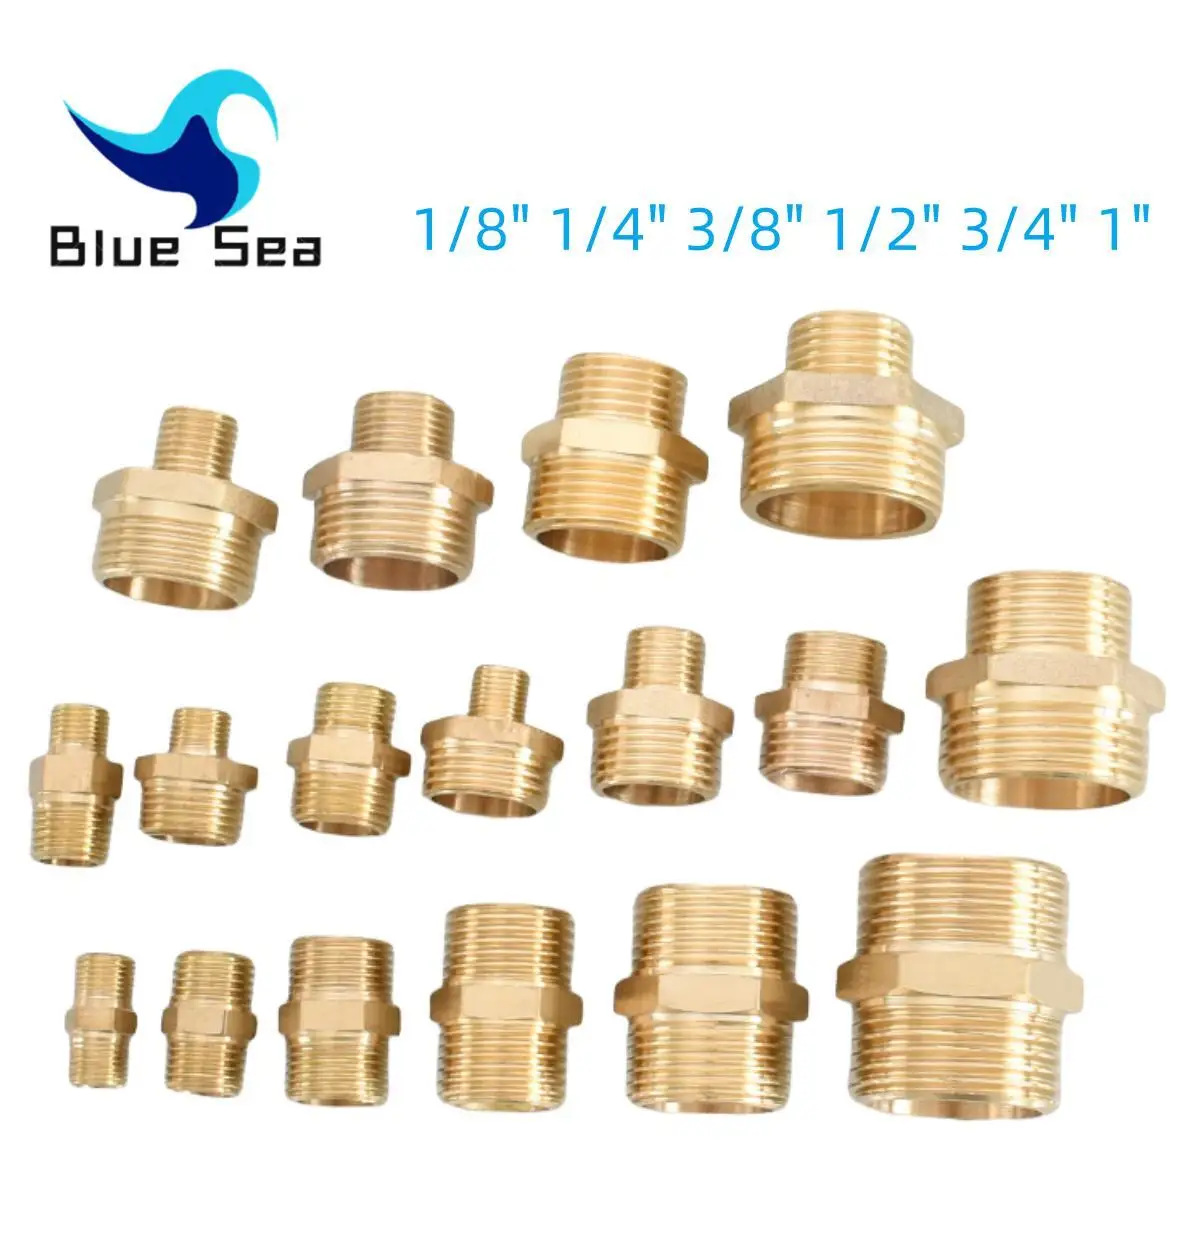 

Brass Pipe Hex Nipple Fitting 1/8" 1/4" 3/8" 1/2" 3/4" 1" BSP Male Thread Quick Adapter Coupler Connector for Water Oil Gas